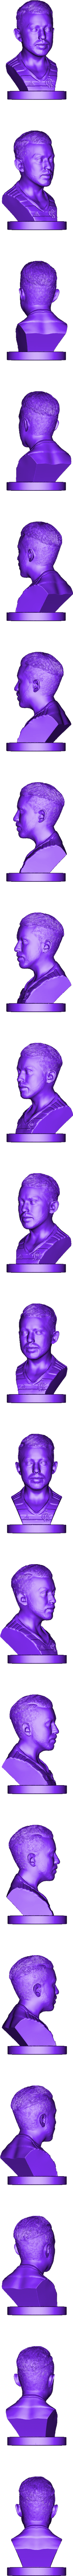 Corrupted Image File PNG